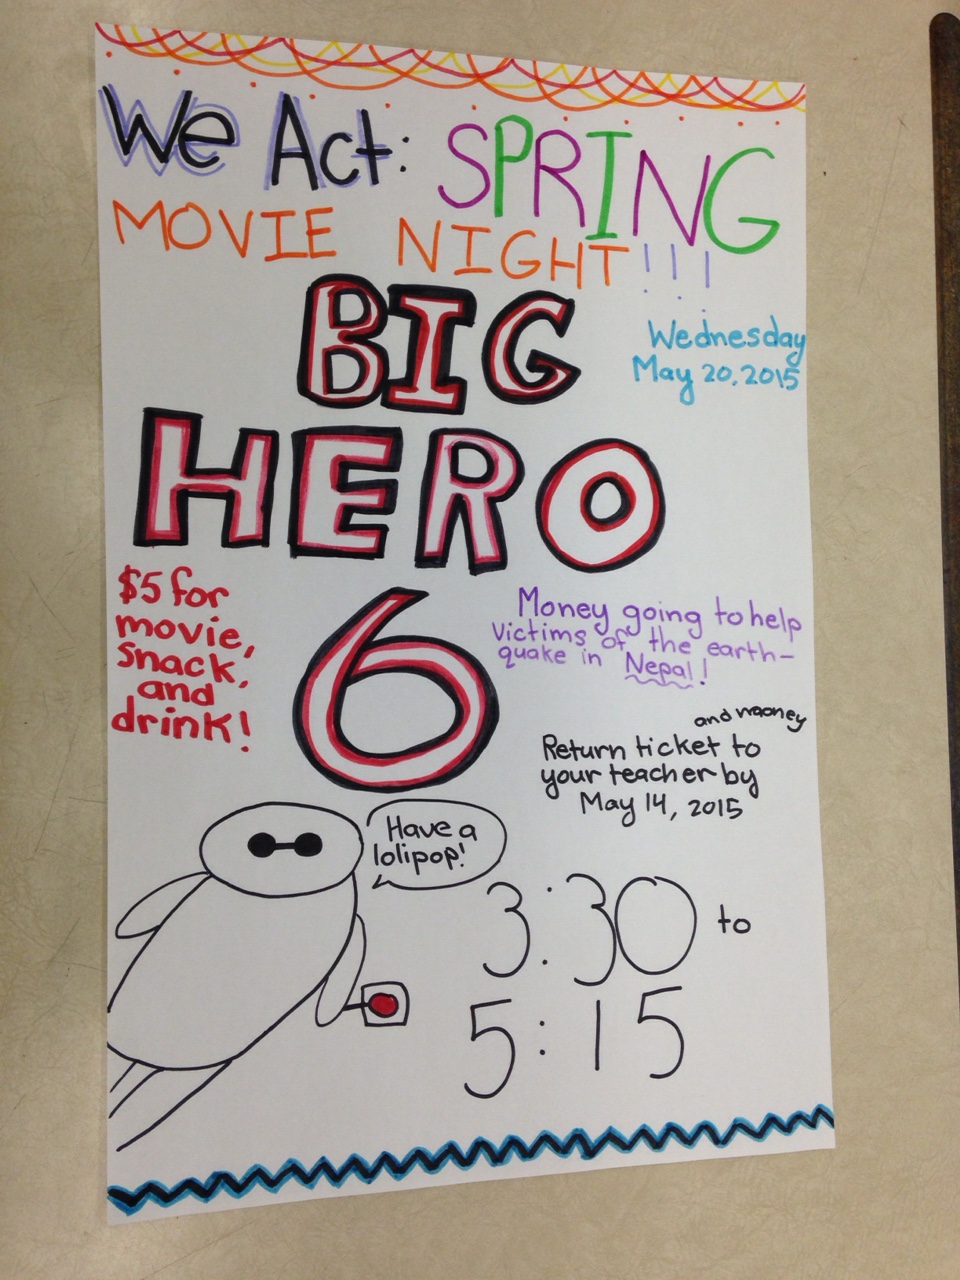 Through a movie night, Sunalta Elementary School raised $740 for UNHCR's Nepalese earthquake relief campaign.